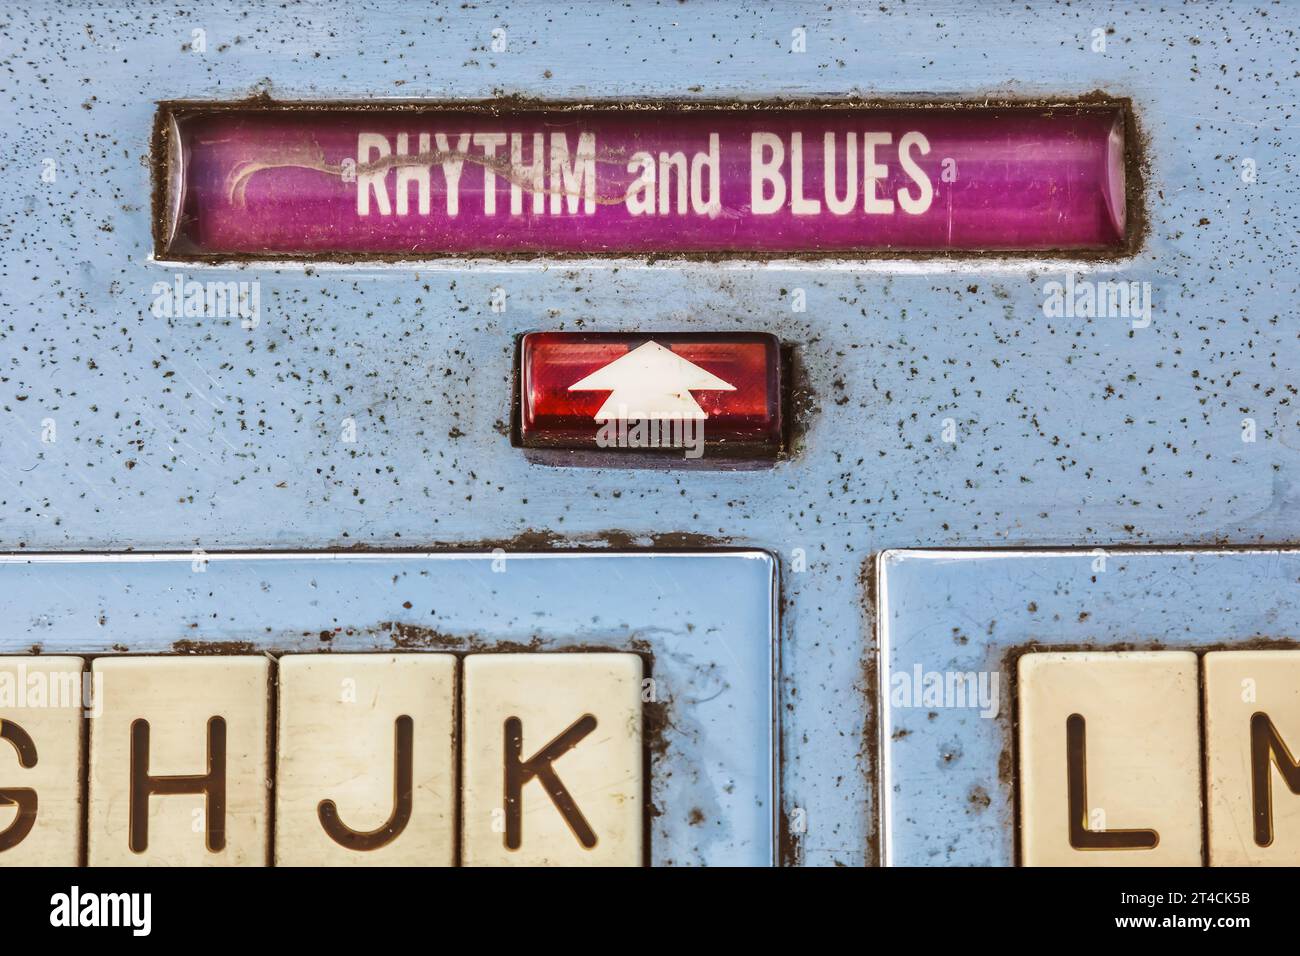 Close up of a vintage jukebox with a text label Rhytm and Blues Stock Photo